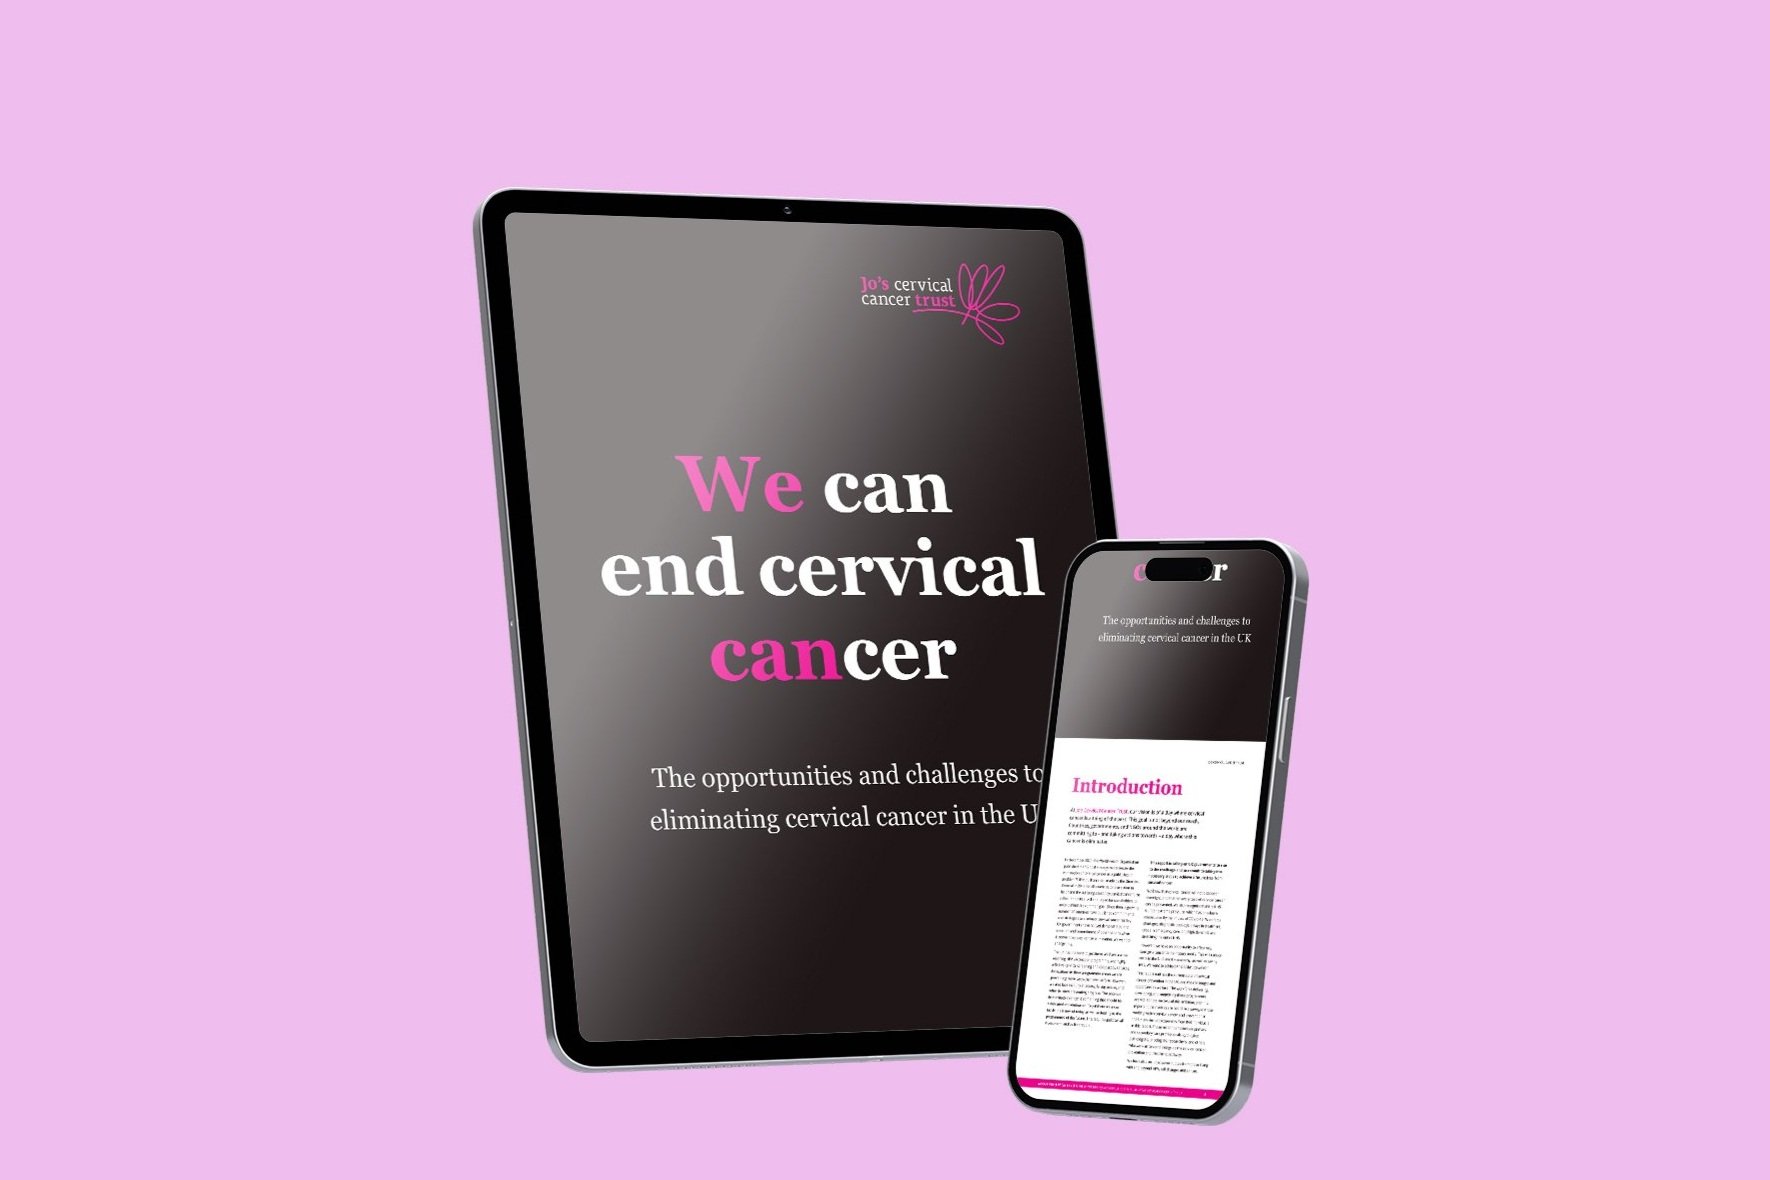 jos-cervical-cancer-trust-report-cover-intro-2023-tablet.jpg